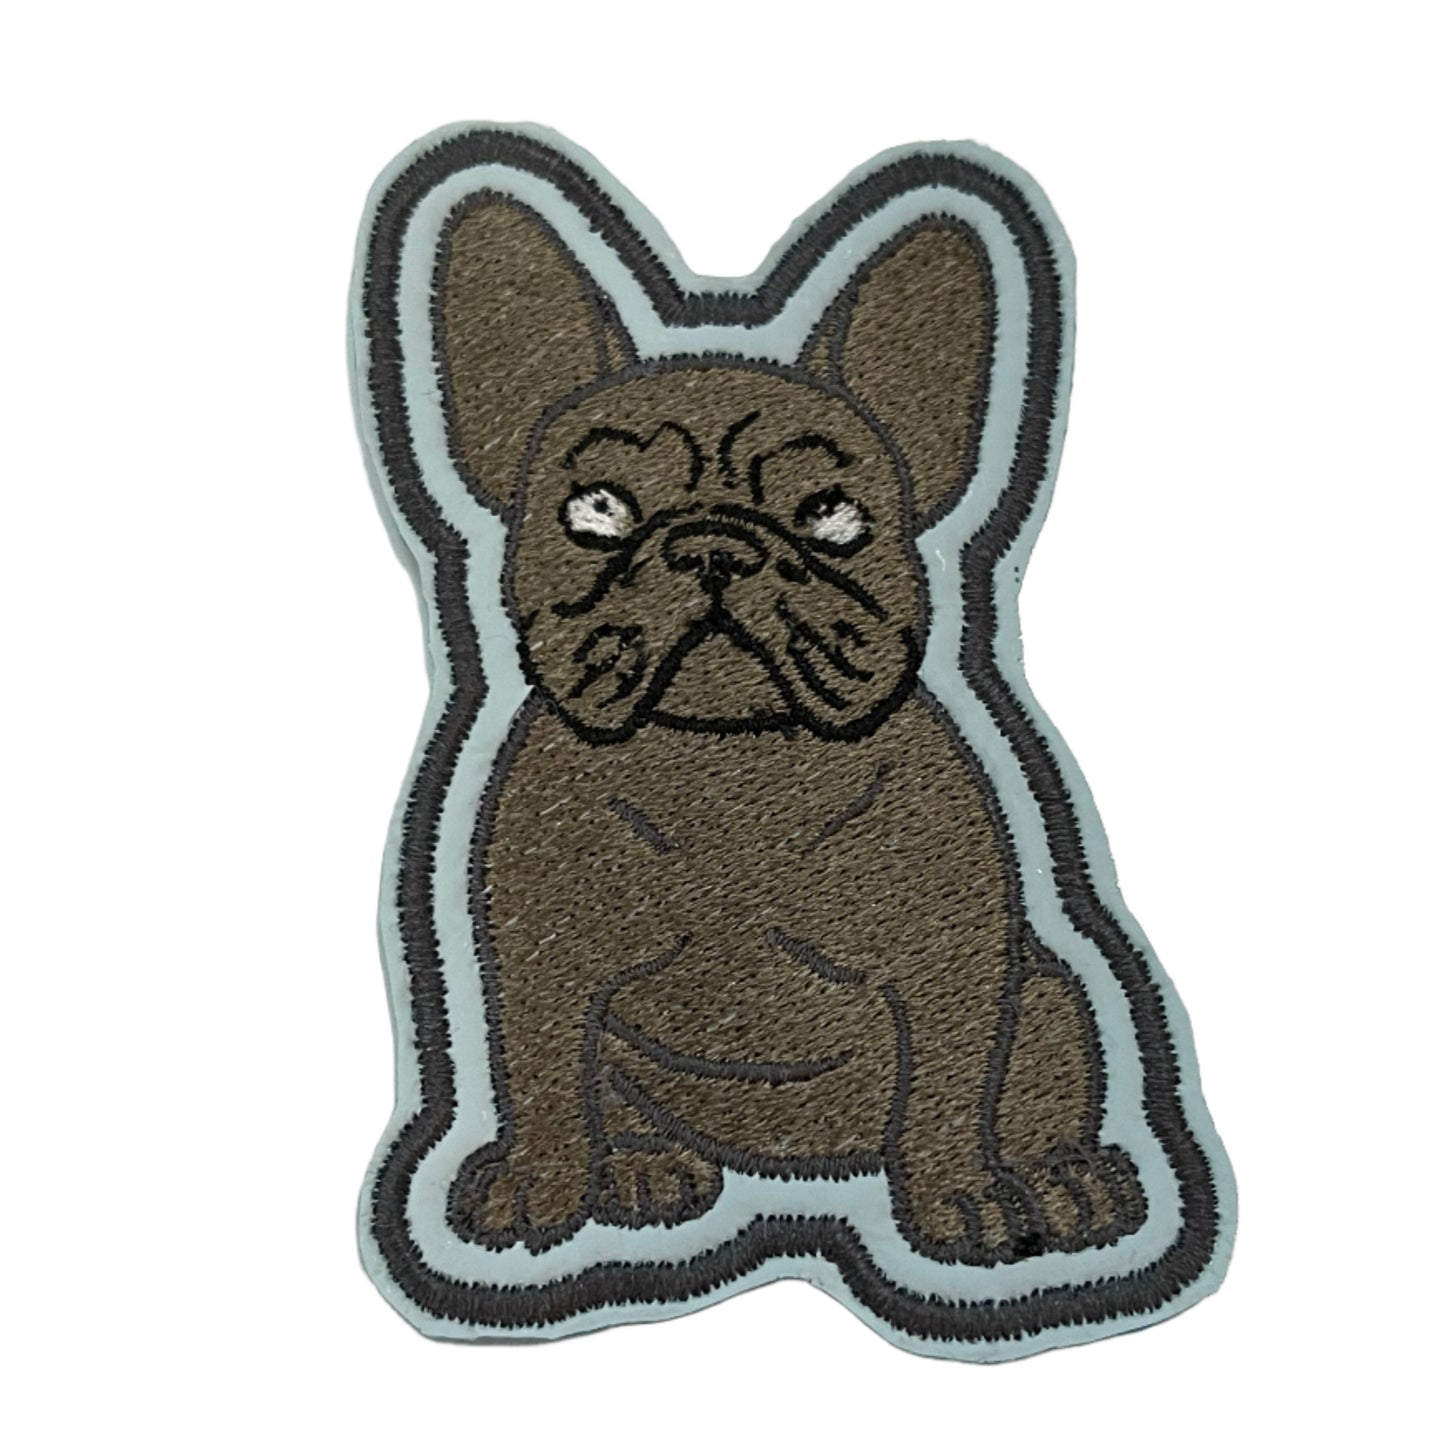 French Bulldog Iron-On Patch - Stylish and Fun for Dog Lovers